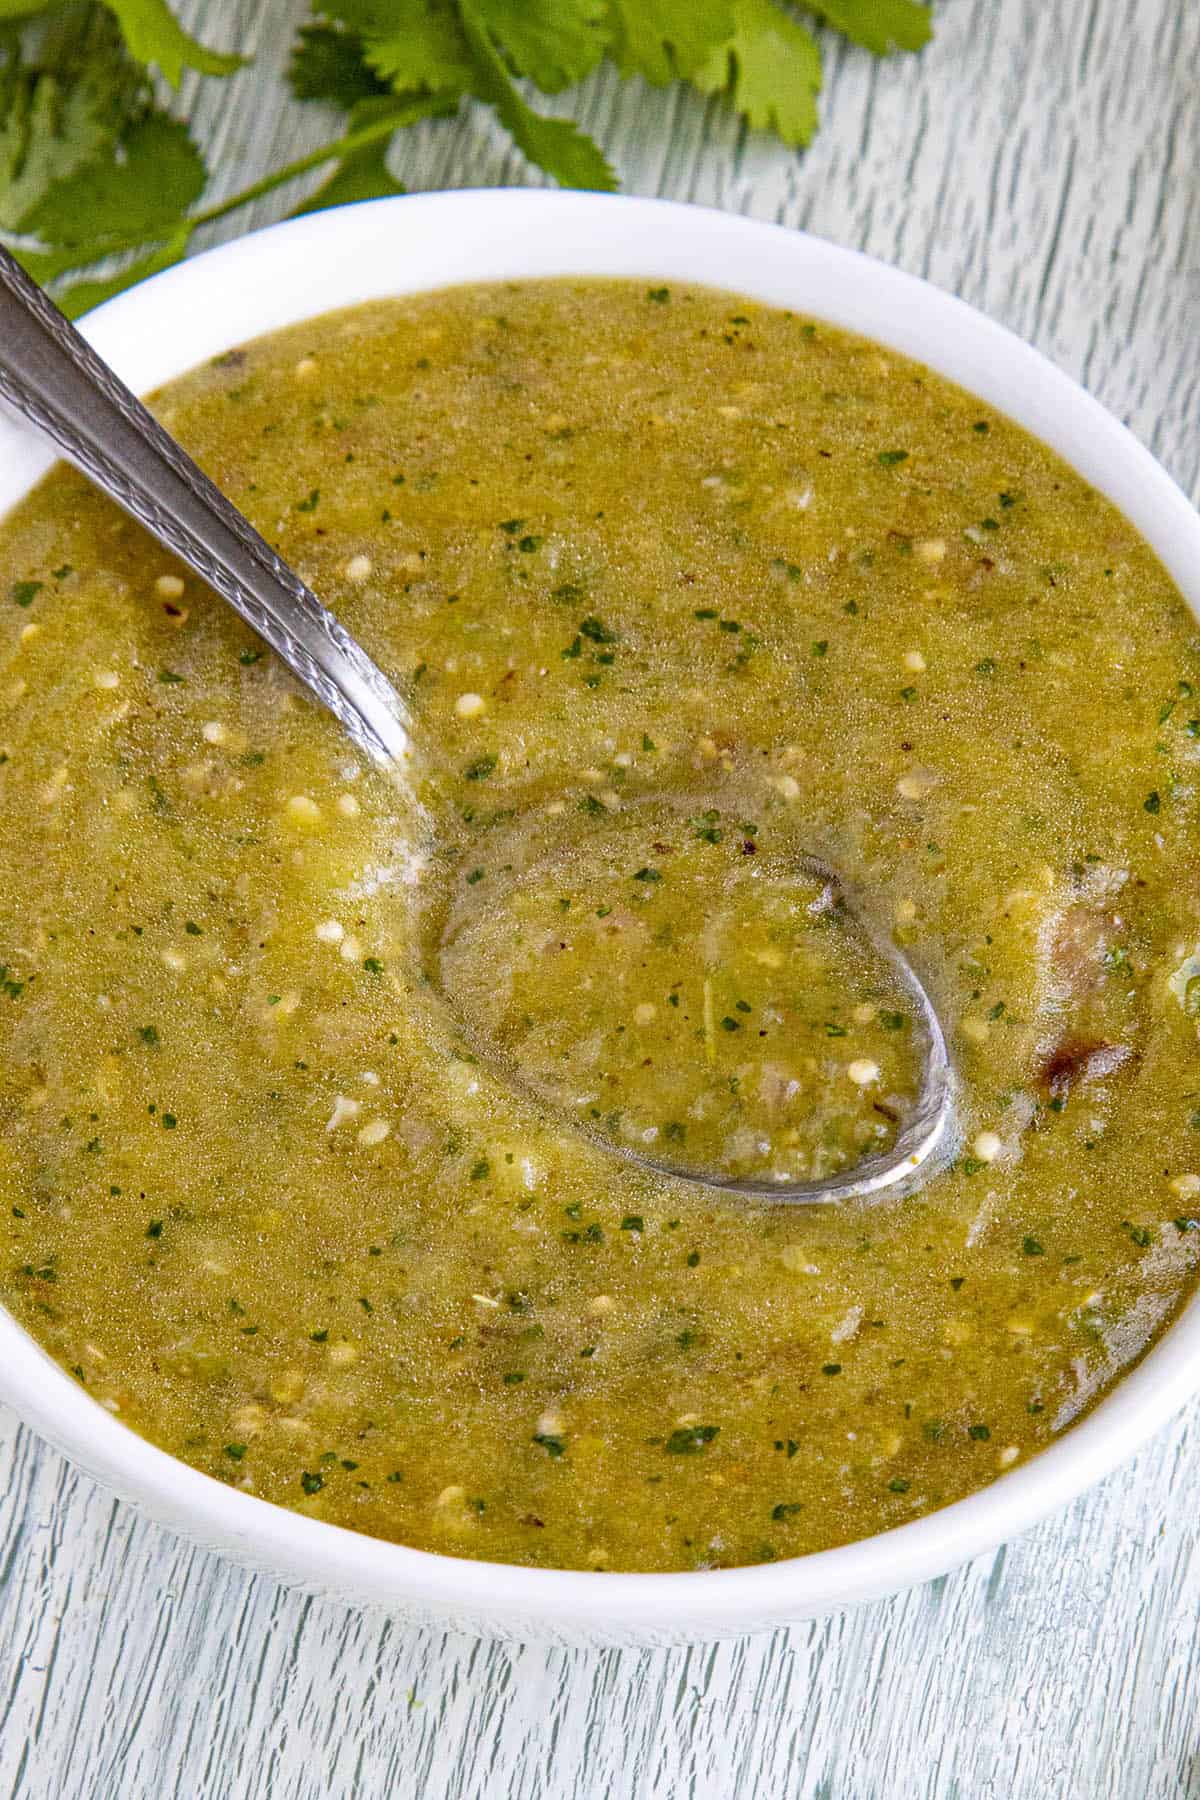 Tomatillo Sauce in a bowl with a spoon